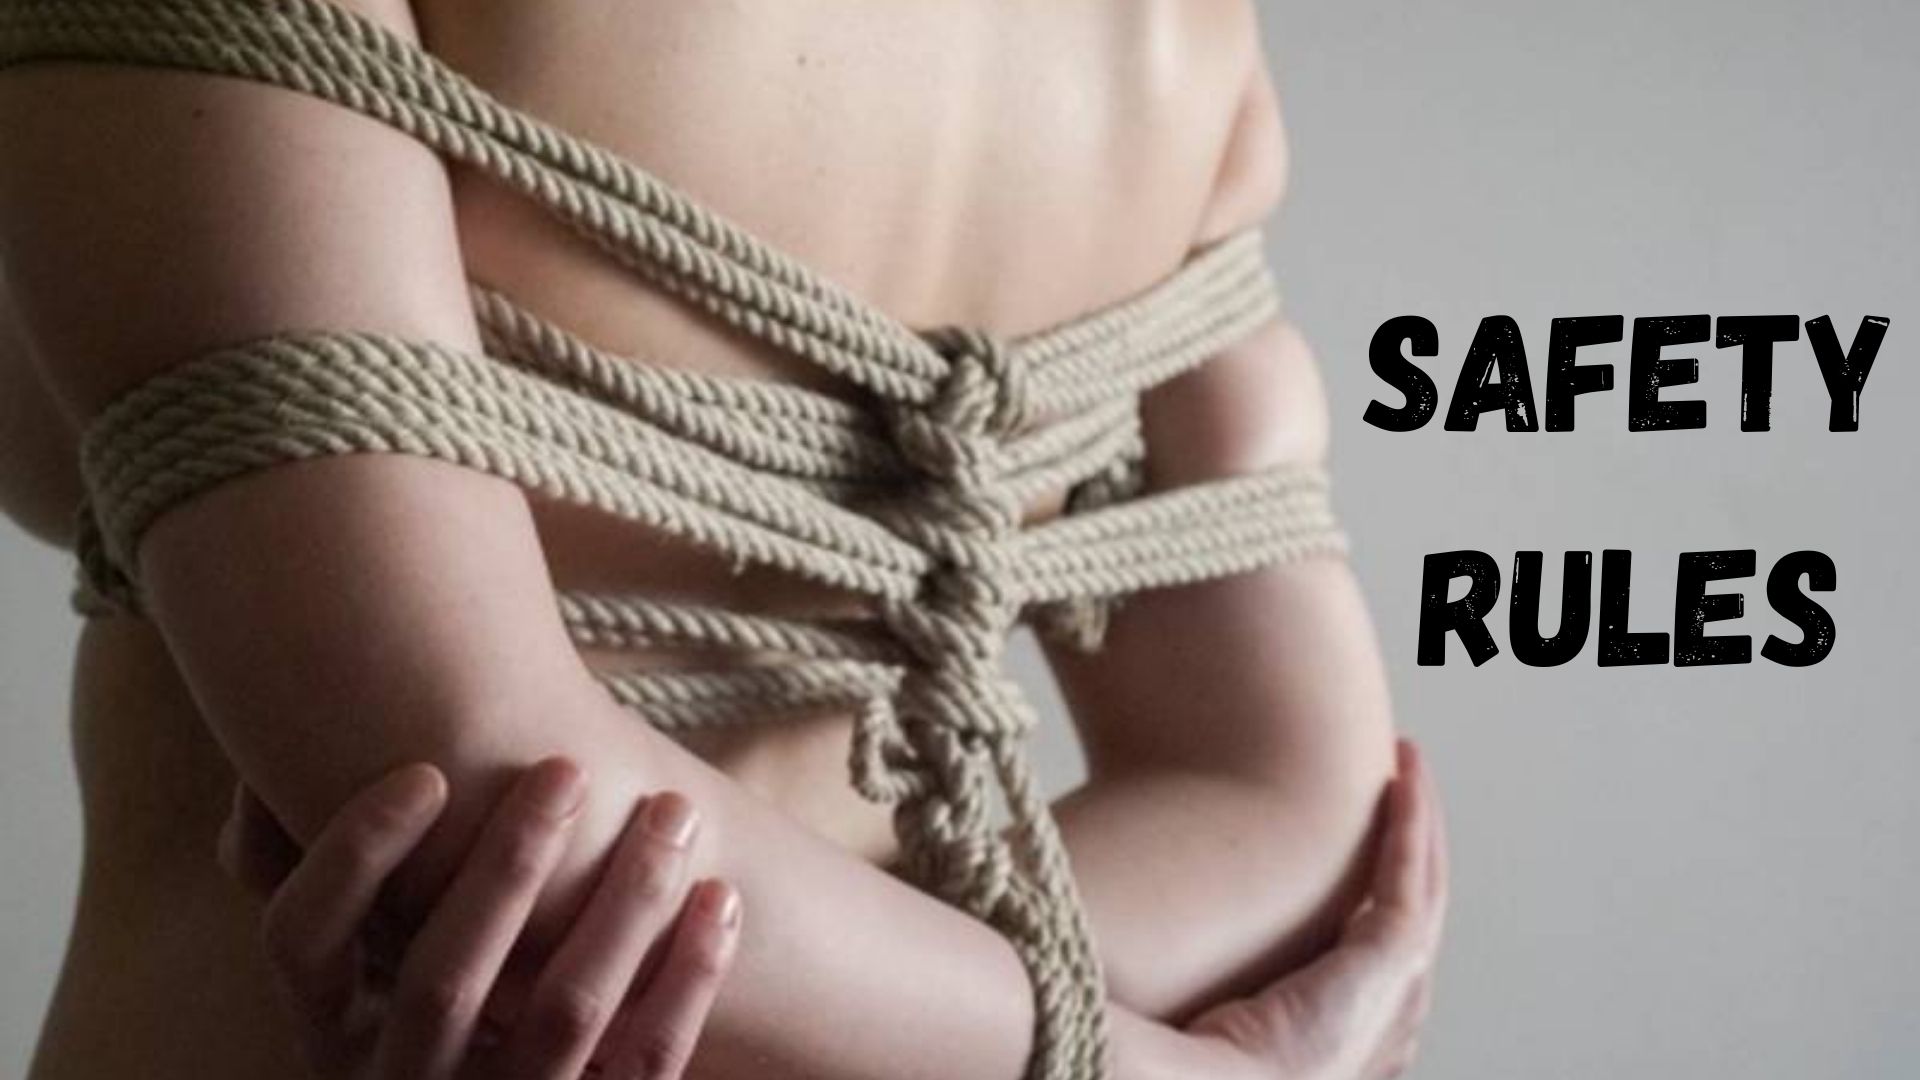 Safety Rules for Rope Play